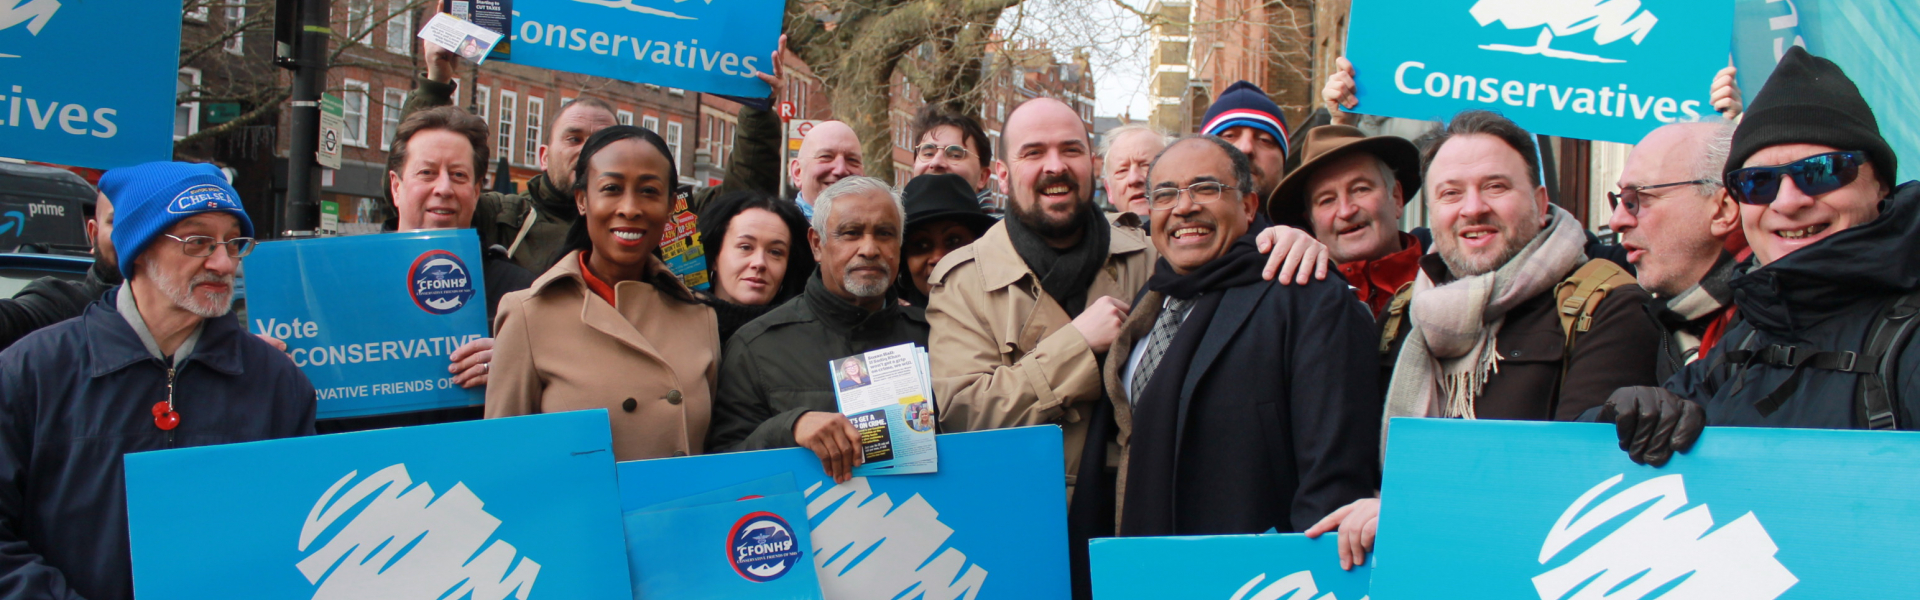 Conservatives in Hampstead (Photo Cred: K Ganzorig)